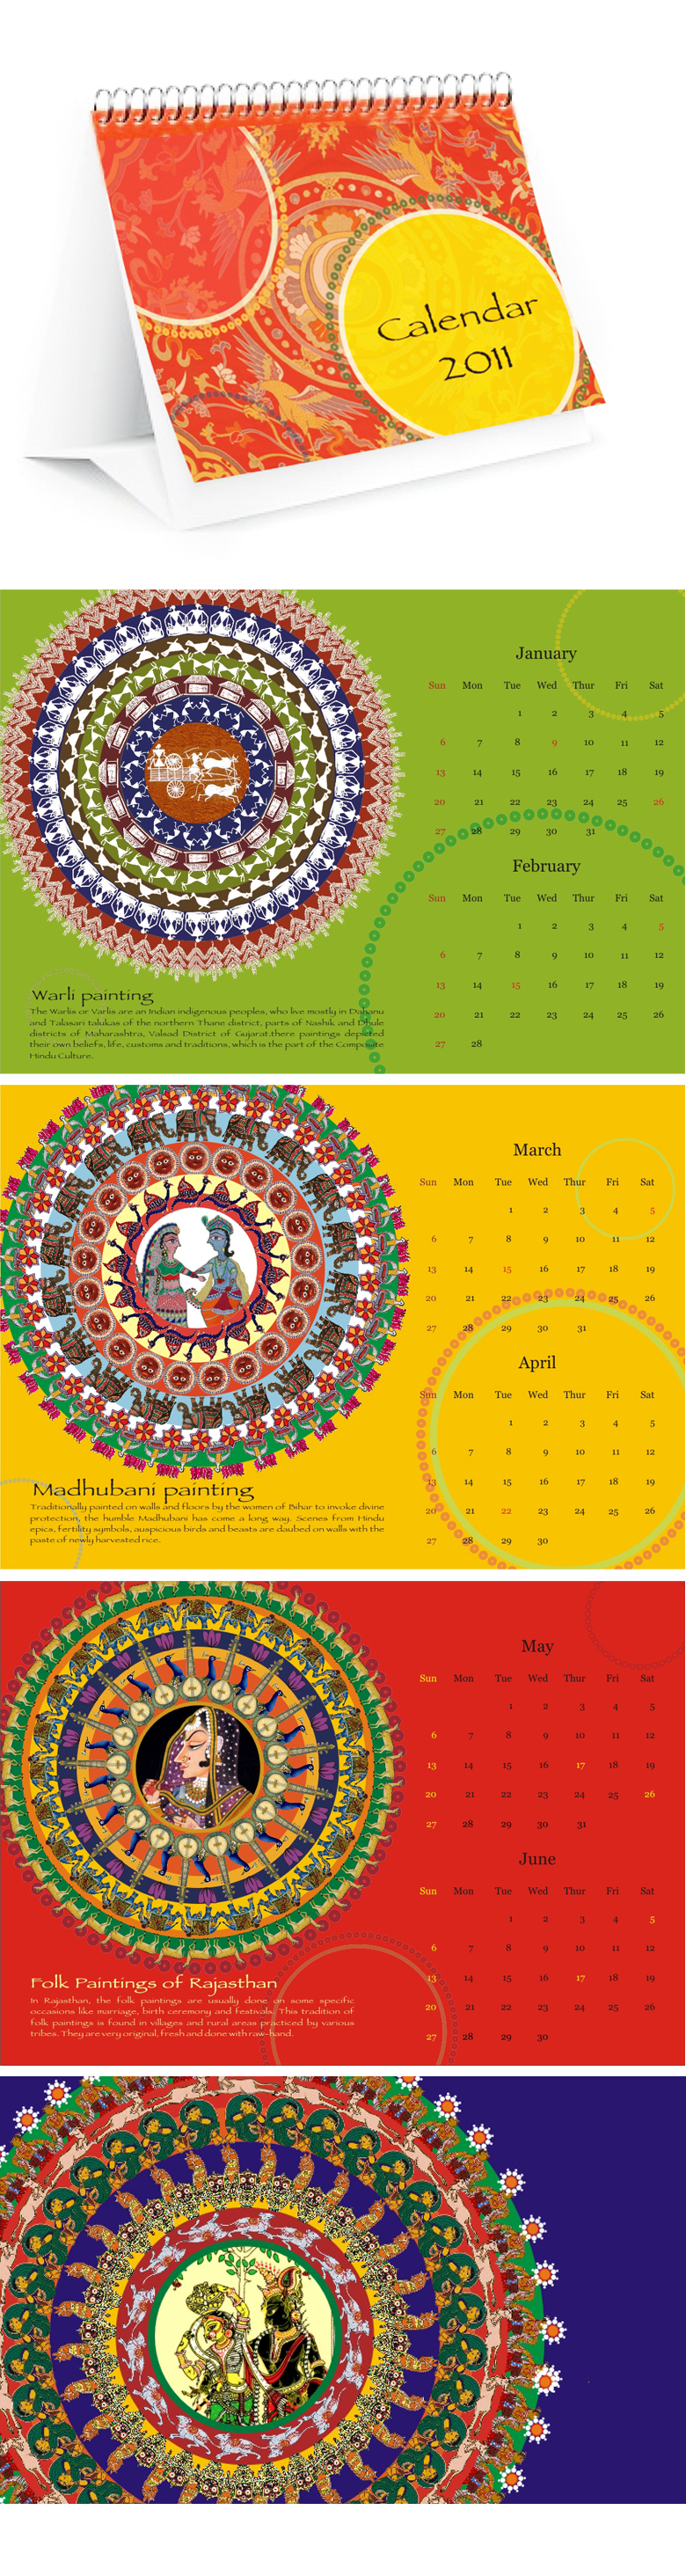 Calender Design Indian traditional paintings